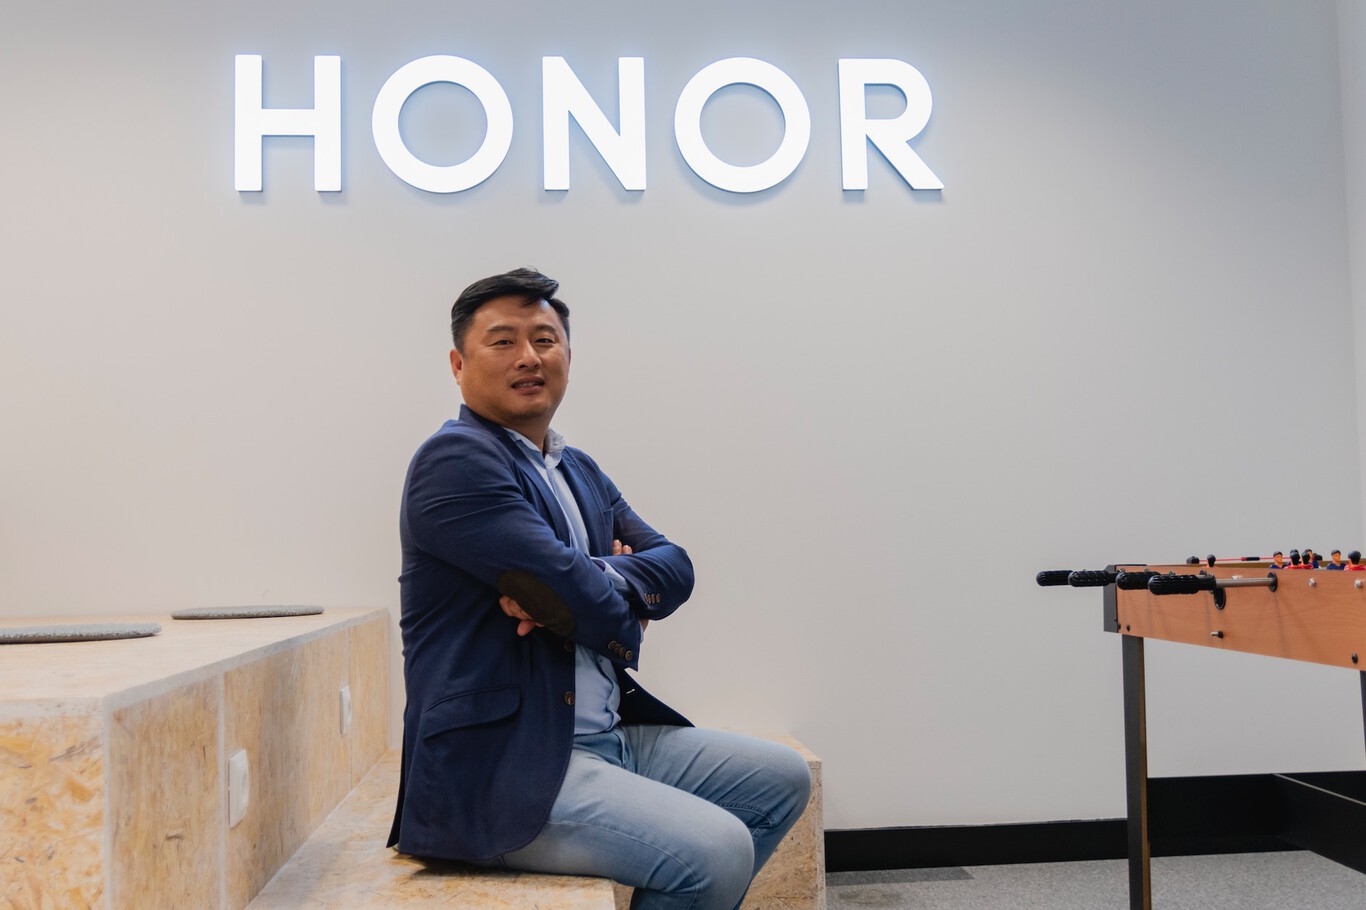 the-new-honor-wants-to-compete-with-apple-and-samsung,-what-new-products-can-we-expect-and-more:-interview-with-pablo-wang-(vp-honor-europe)